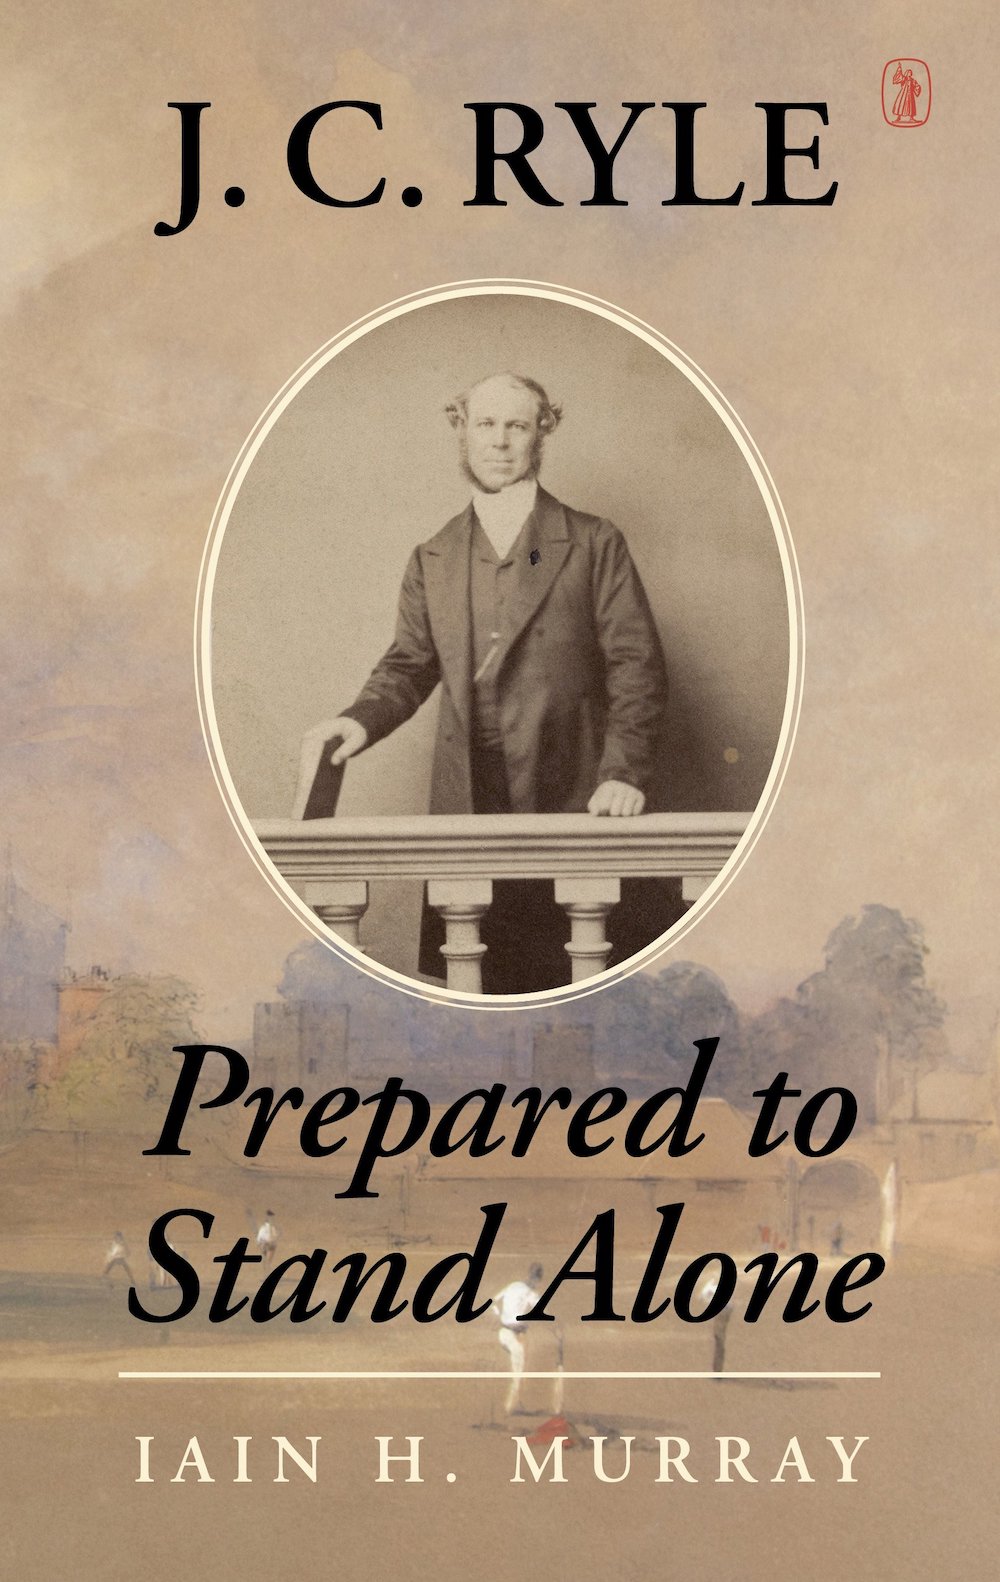 JC Ryle Prepared to Stand Alone